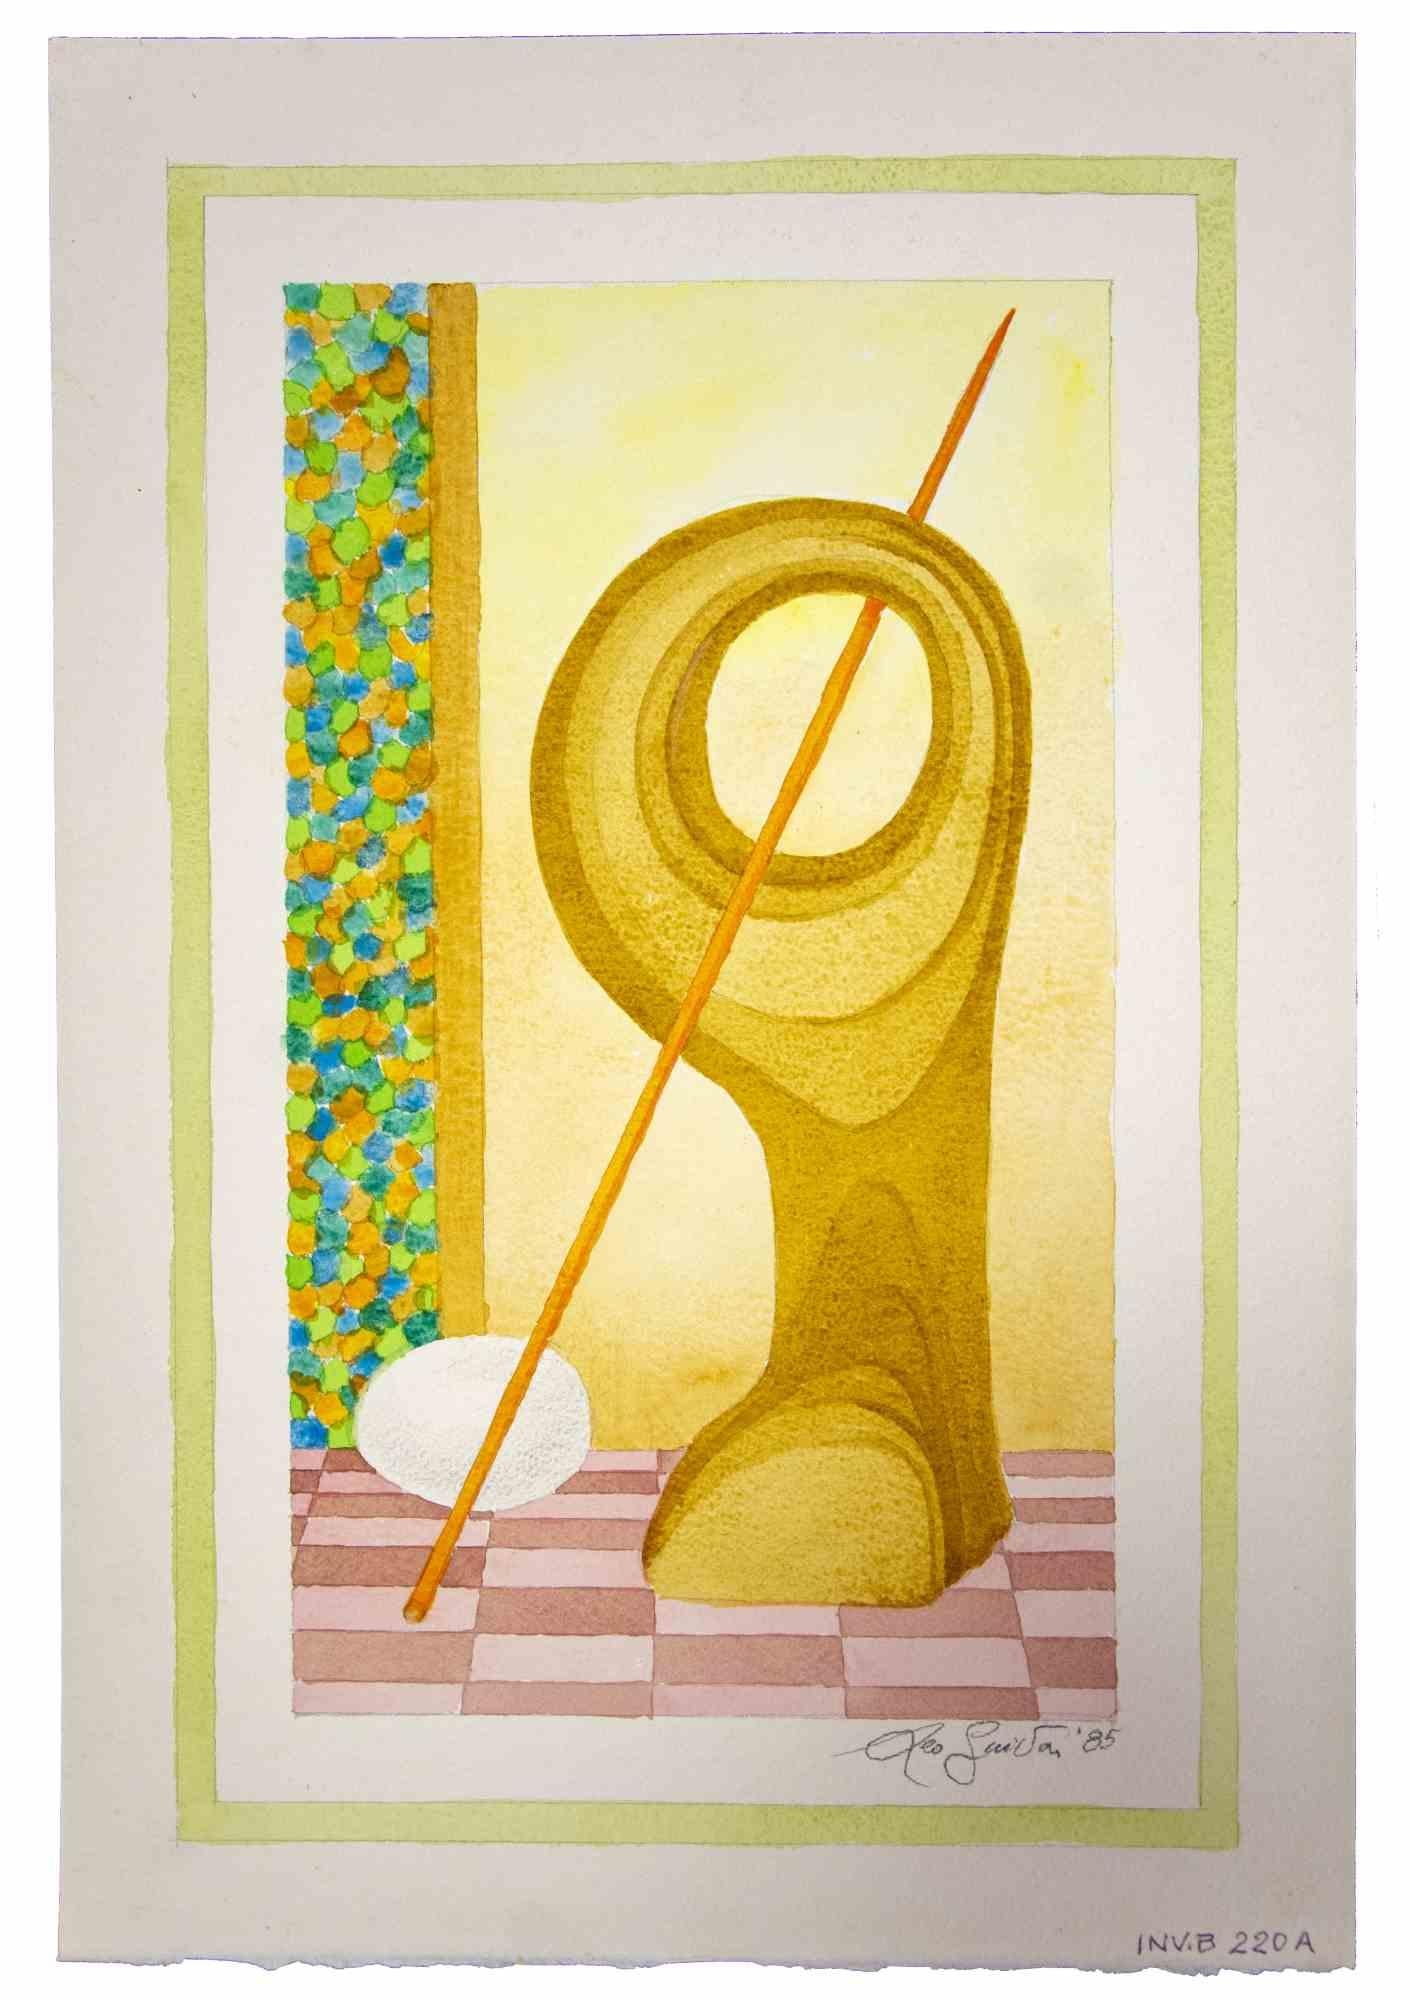 Composition is an original Contemporary artwork realized  in 1985  by the italian Contemporary artist  Leo Guida  (1992 - 2017).

Original drawing in watercolor on ivory-colored cardboard.
 
Hand-signed and dated on the lower margin. Cat. INV.B